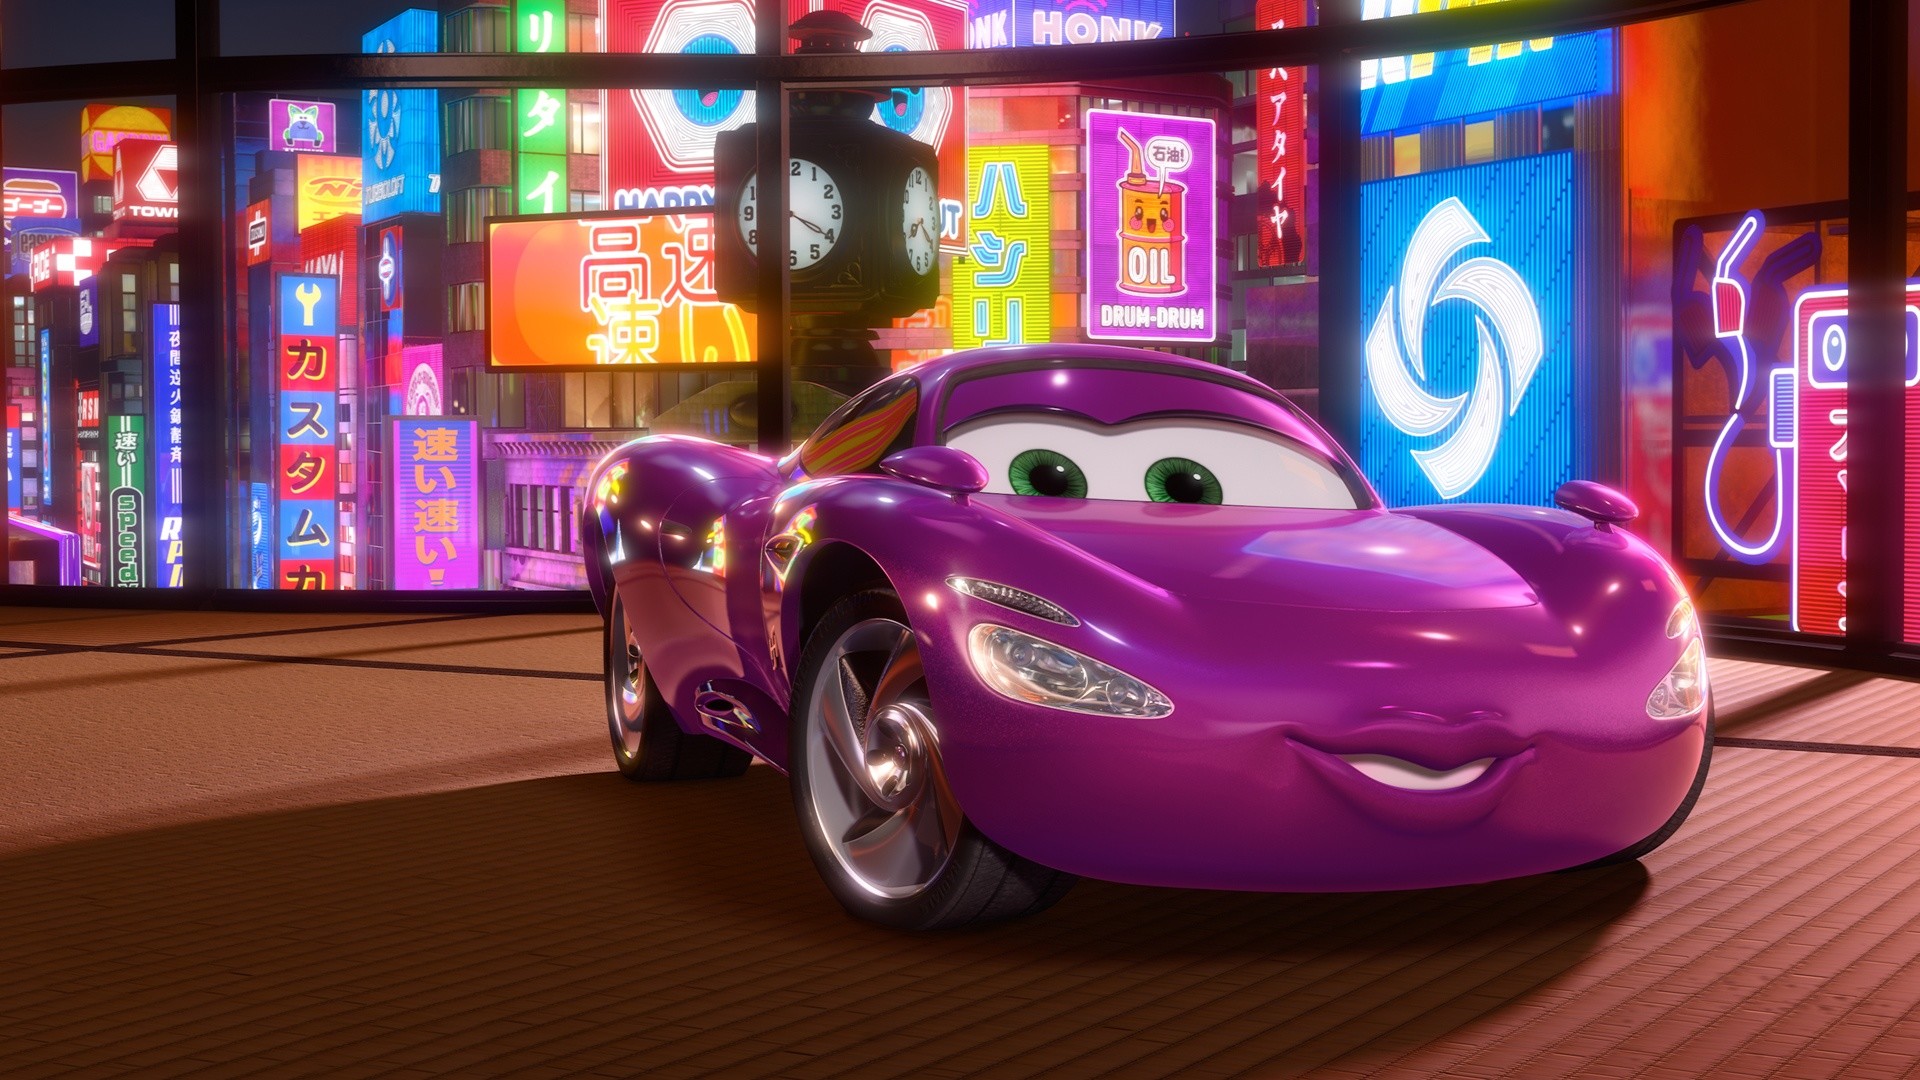 1920x1080 Holley Shiftwell in Cars 2 Movie